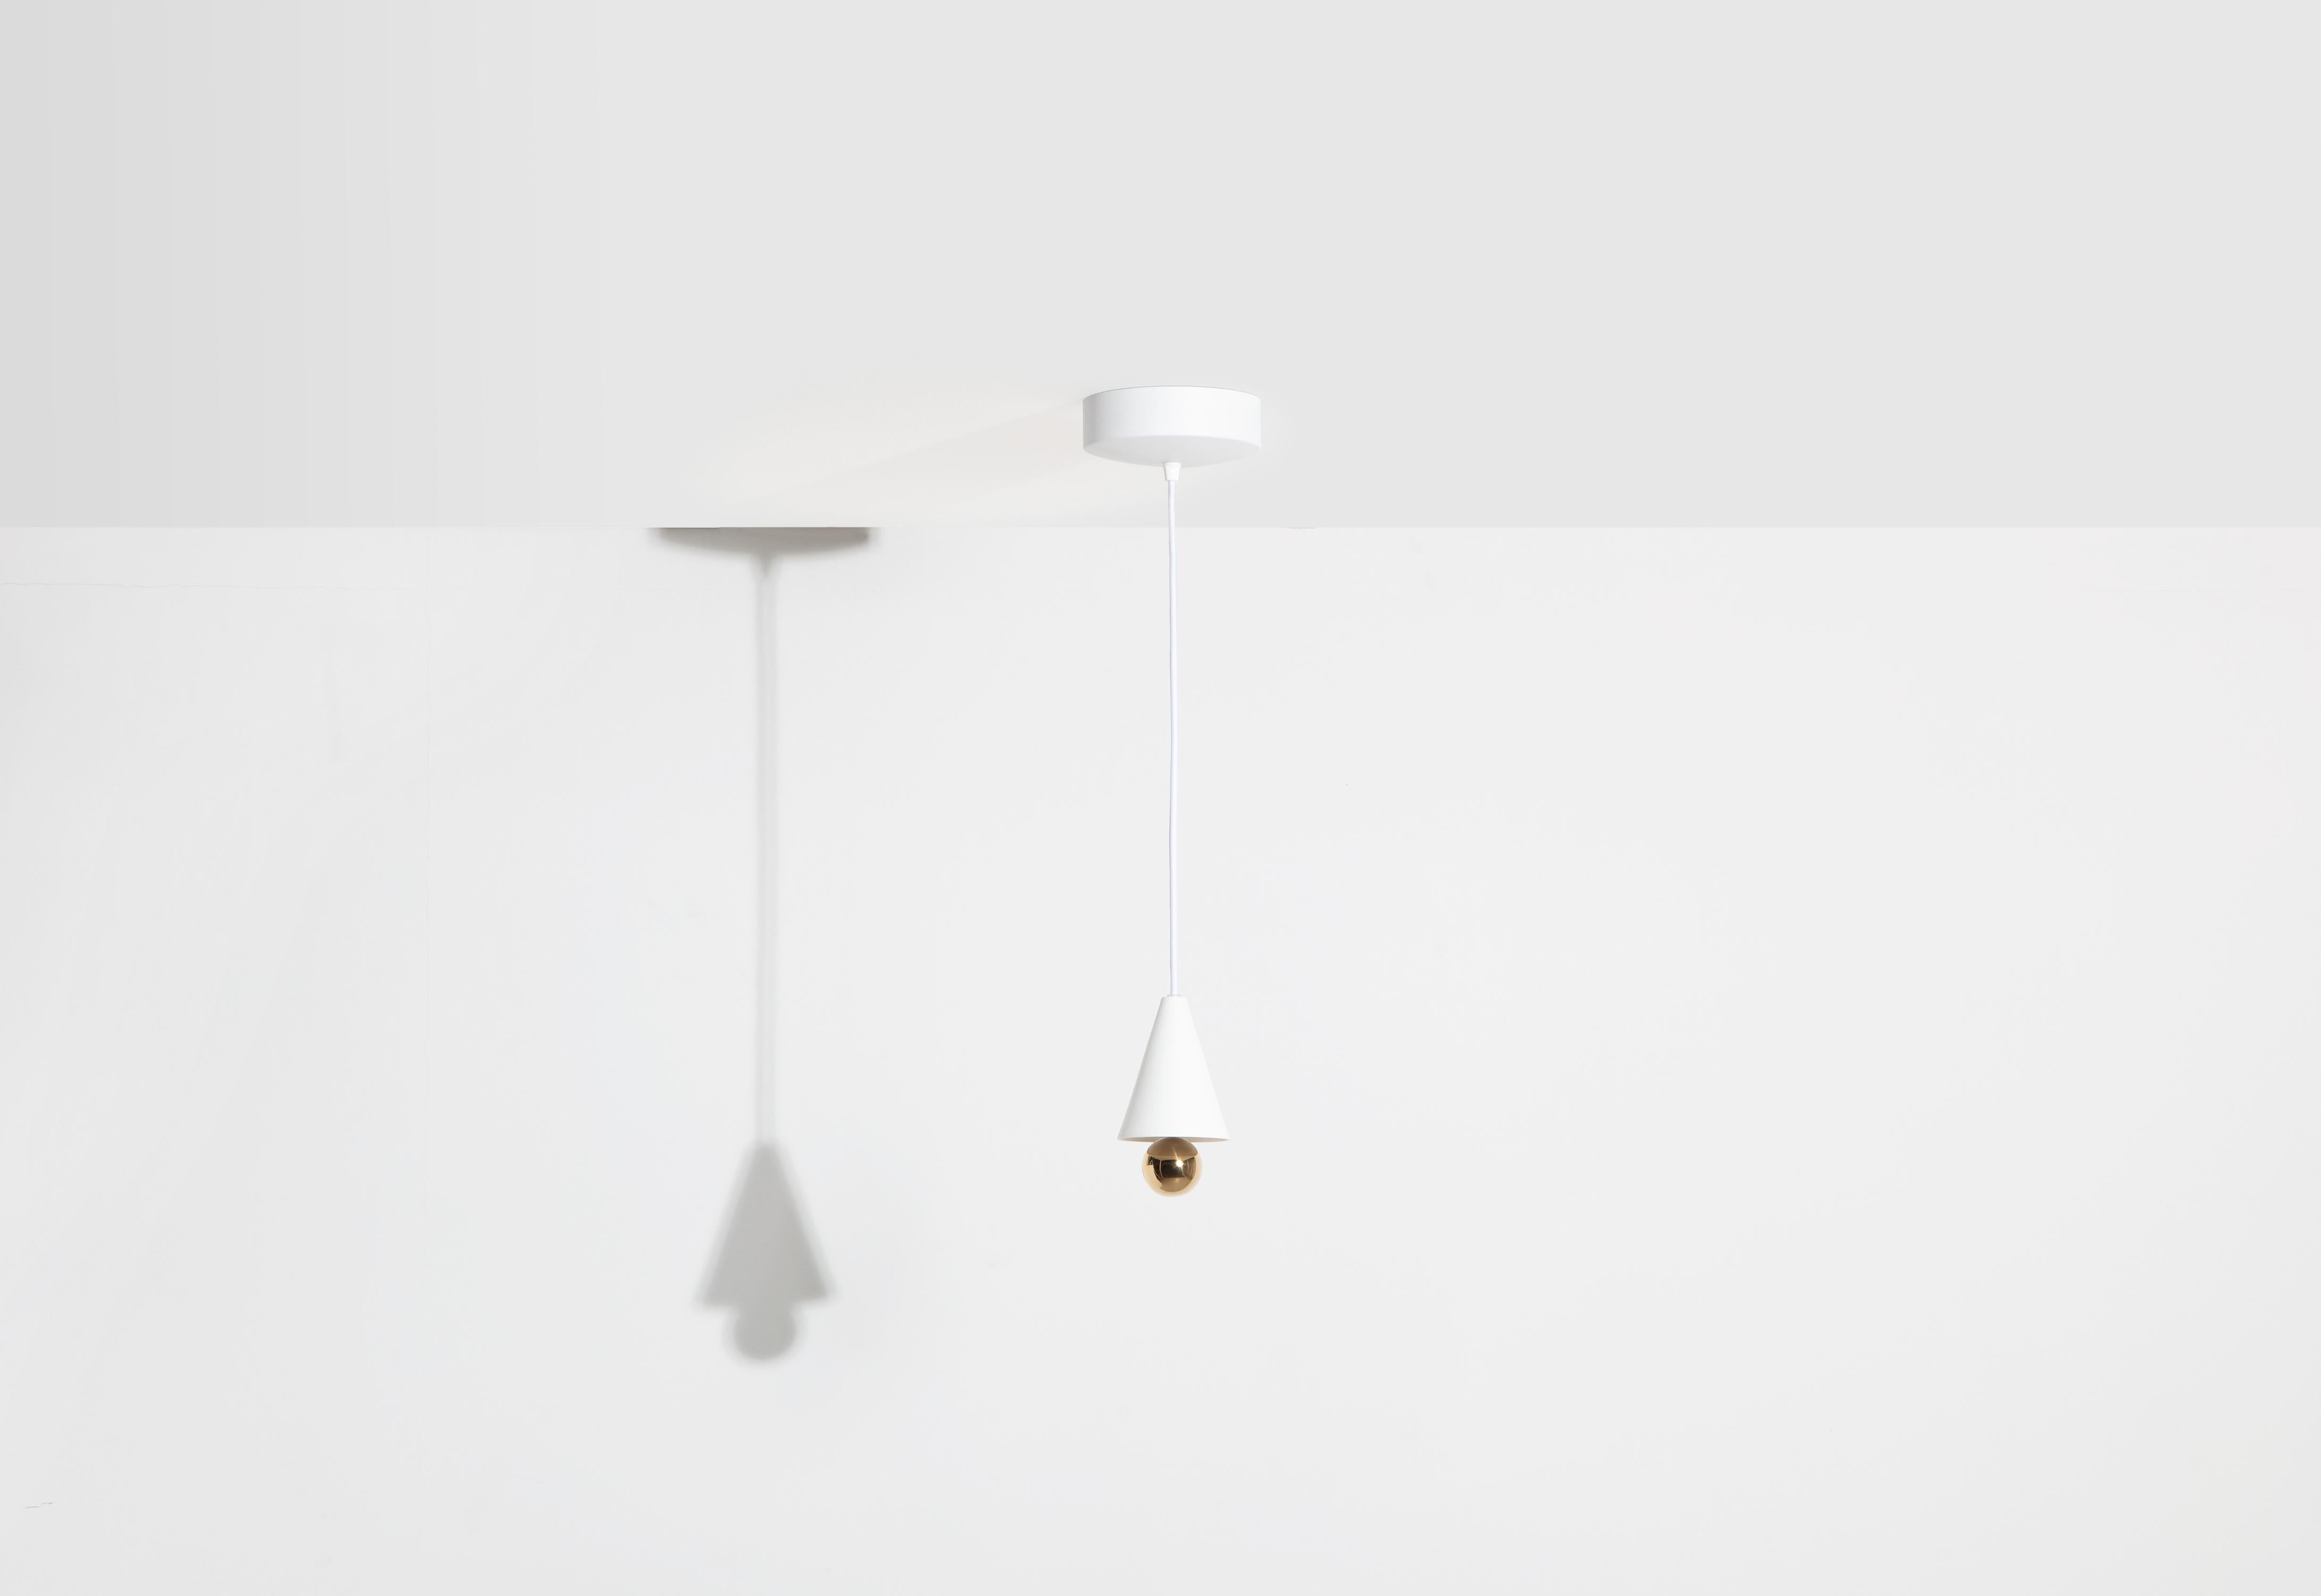 Petite Friture XS Cherry LED Pendant Light in White & Gold Aluminium by Daniel and Emma, 2020

In 2015, the Australian duo designers Daniel and Emma signed Cherry a simple and minimalist pendant lamp design ; an aluminum cone with a bottomed